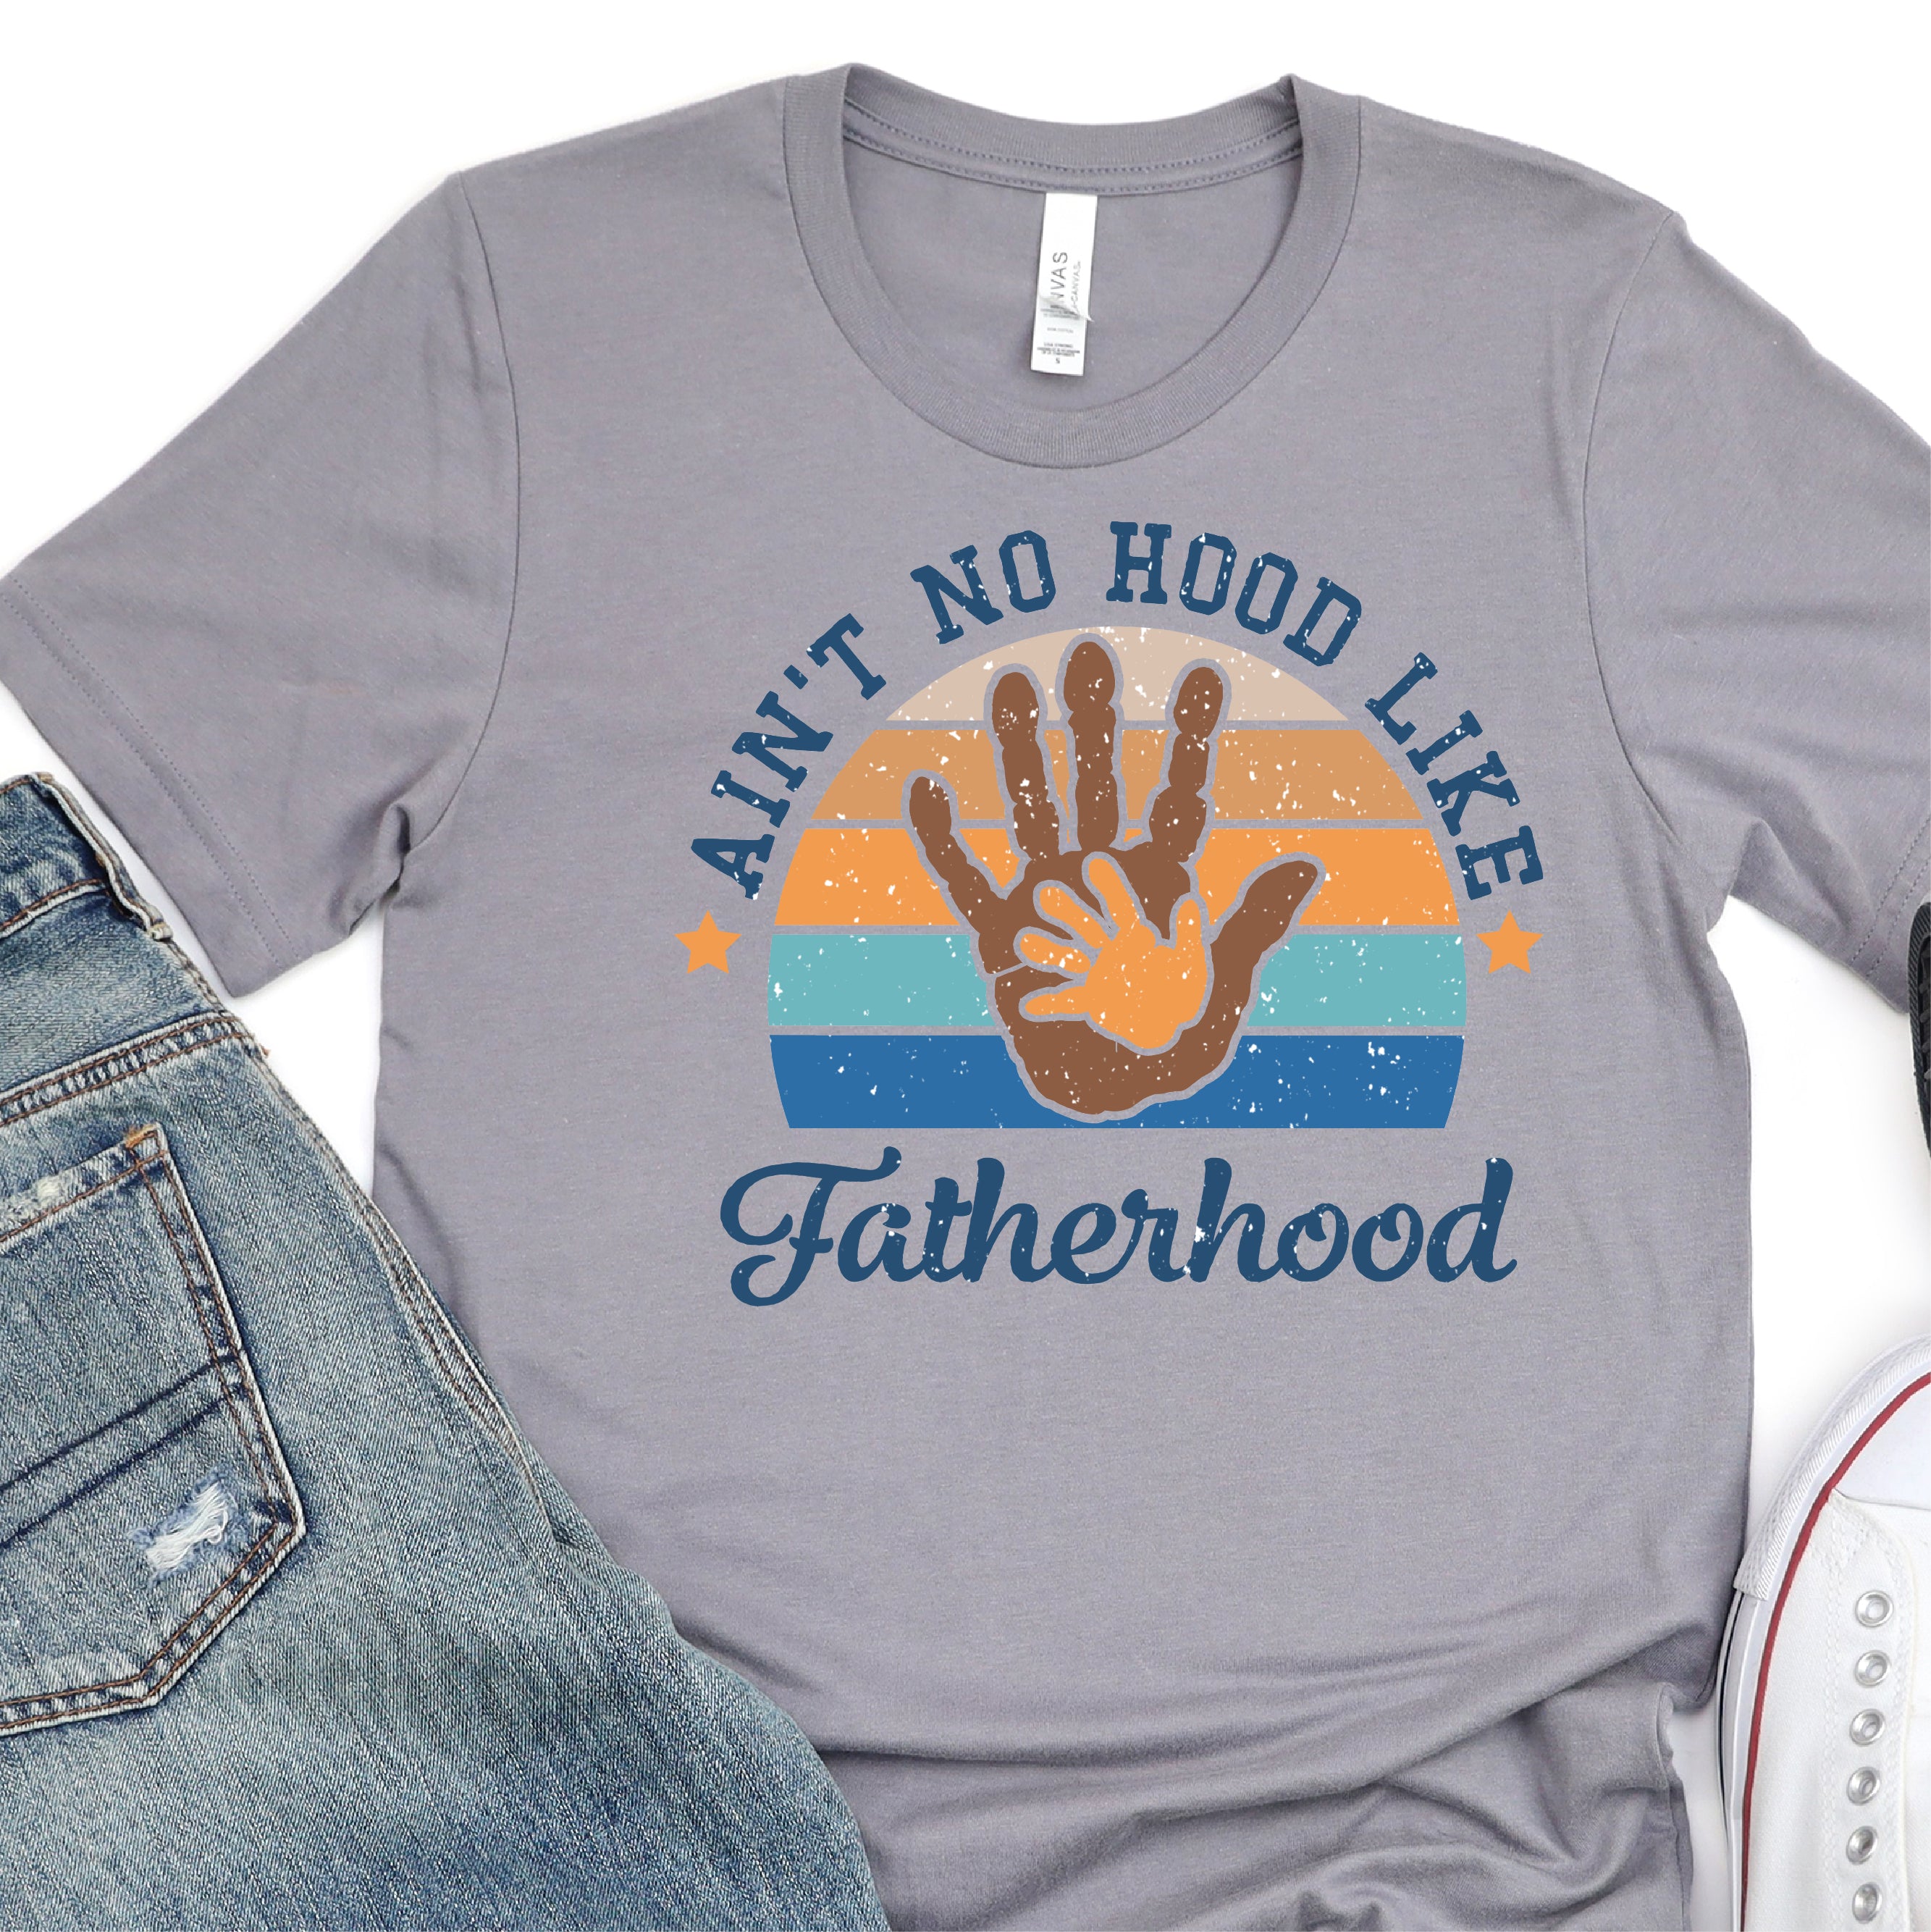 Ain't No Hood Like Fatherhood - Father's Day DTF Transfer - T-shirt Transfer For Dad Nashville Design House